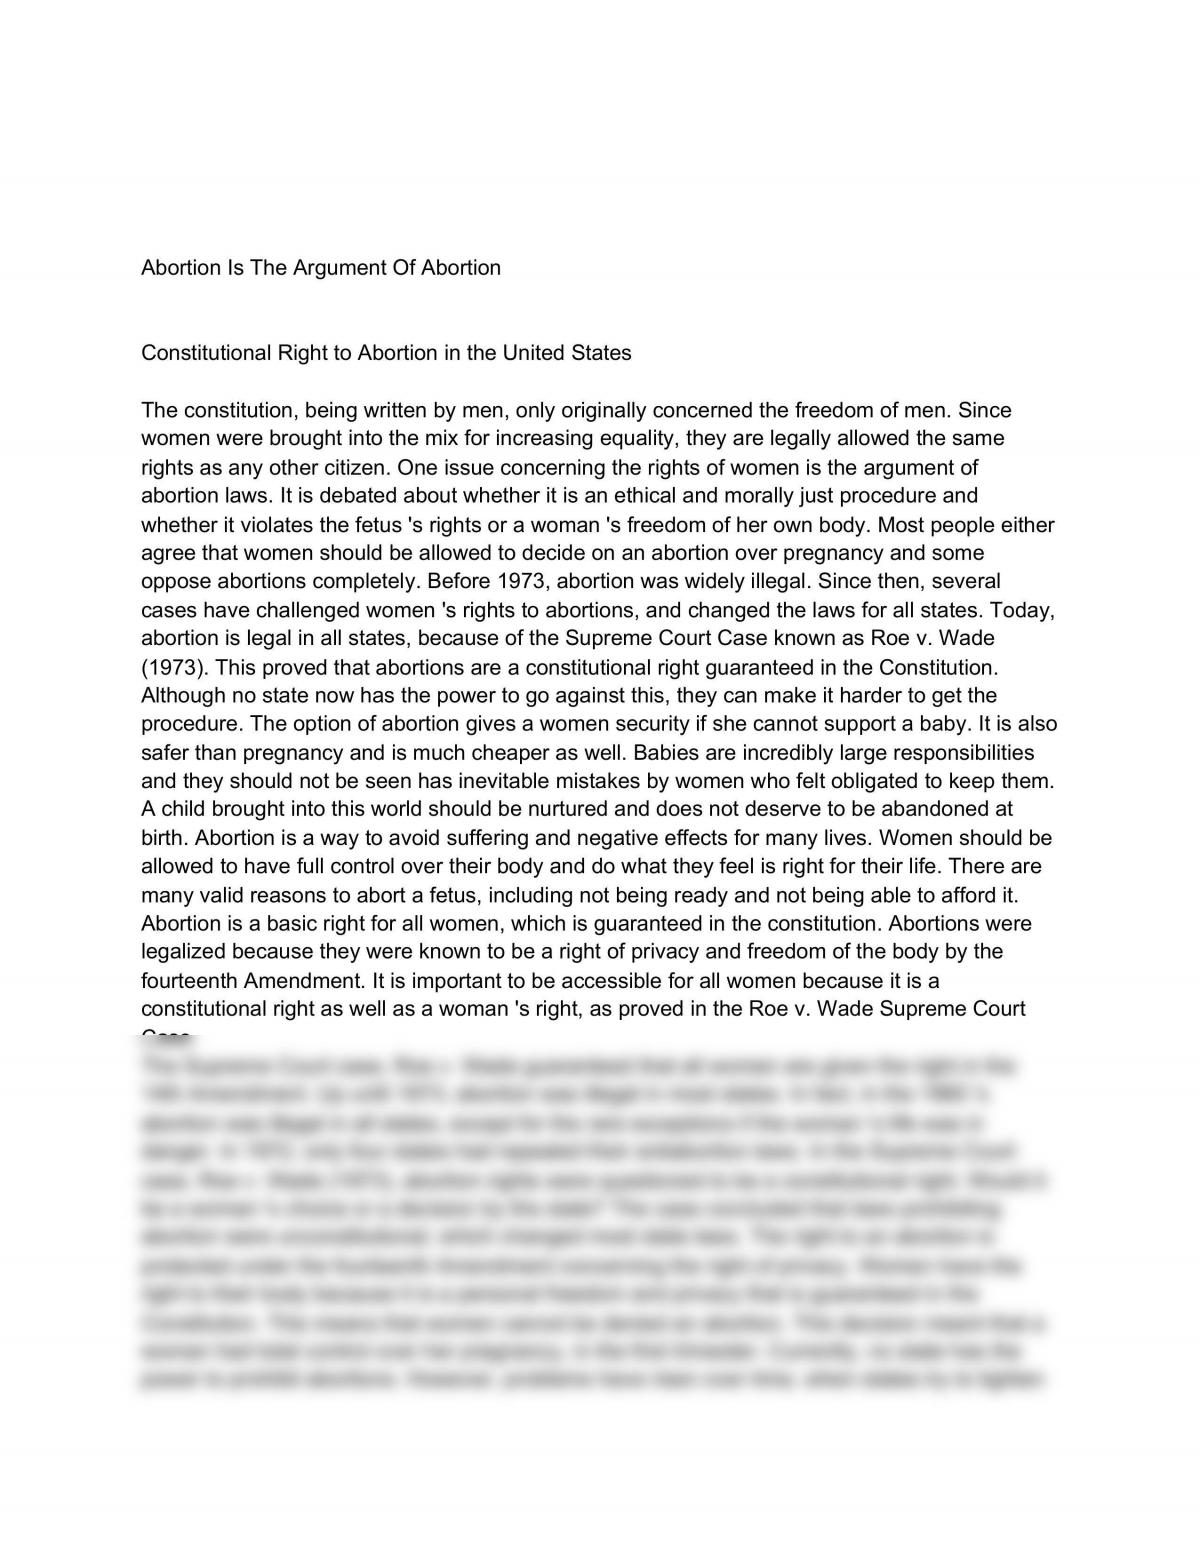 Abortion Is The Argument Of Abortion - Page 1